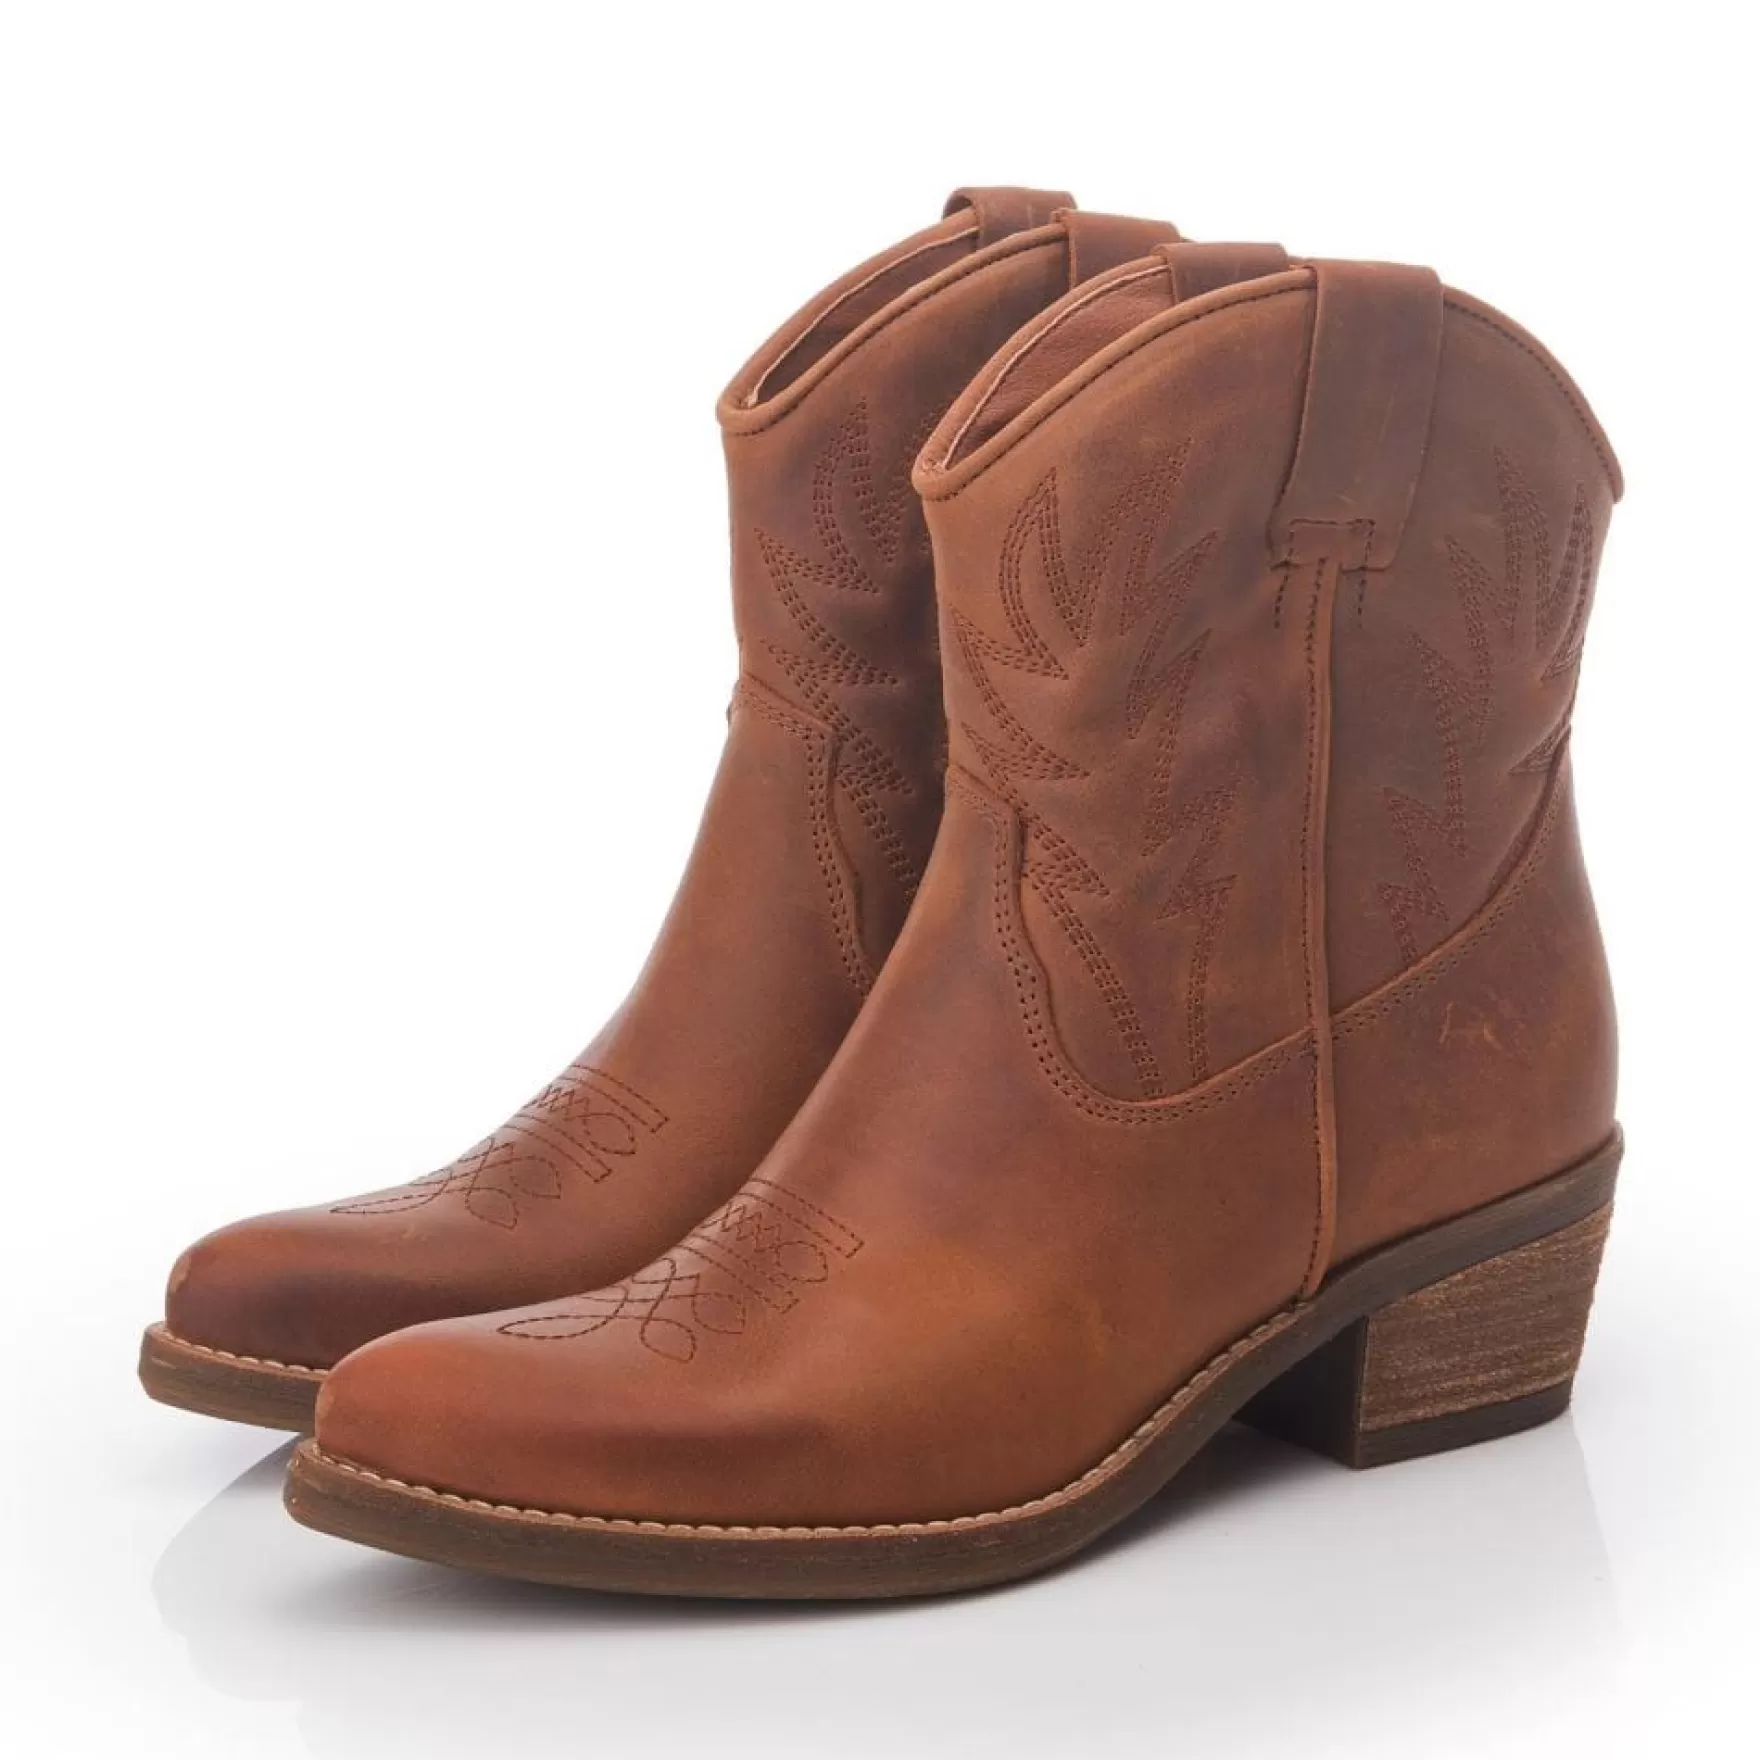 Ankle Boots*Moda in Pelle Ankle Boots